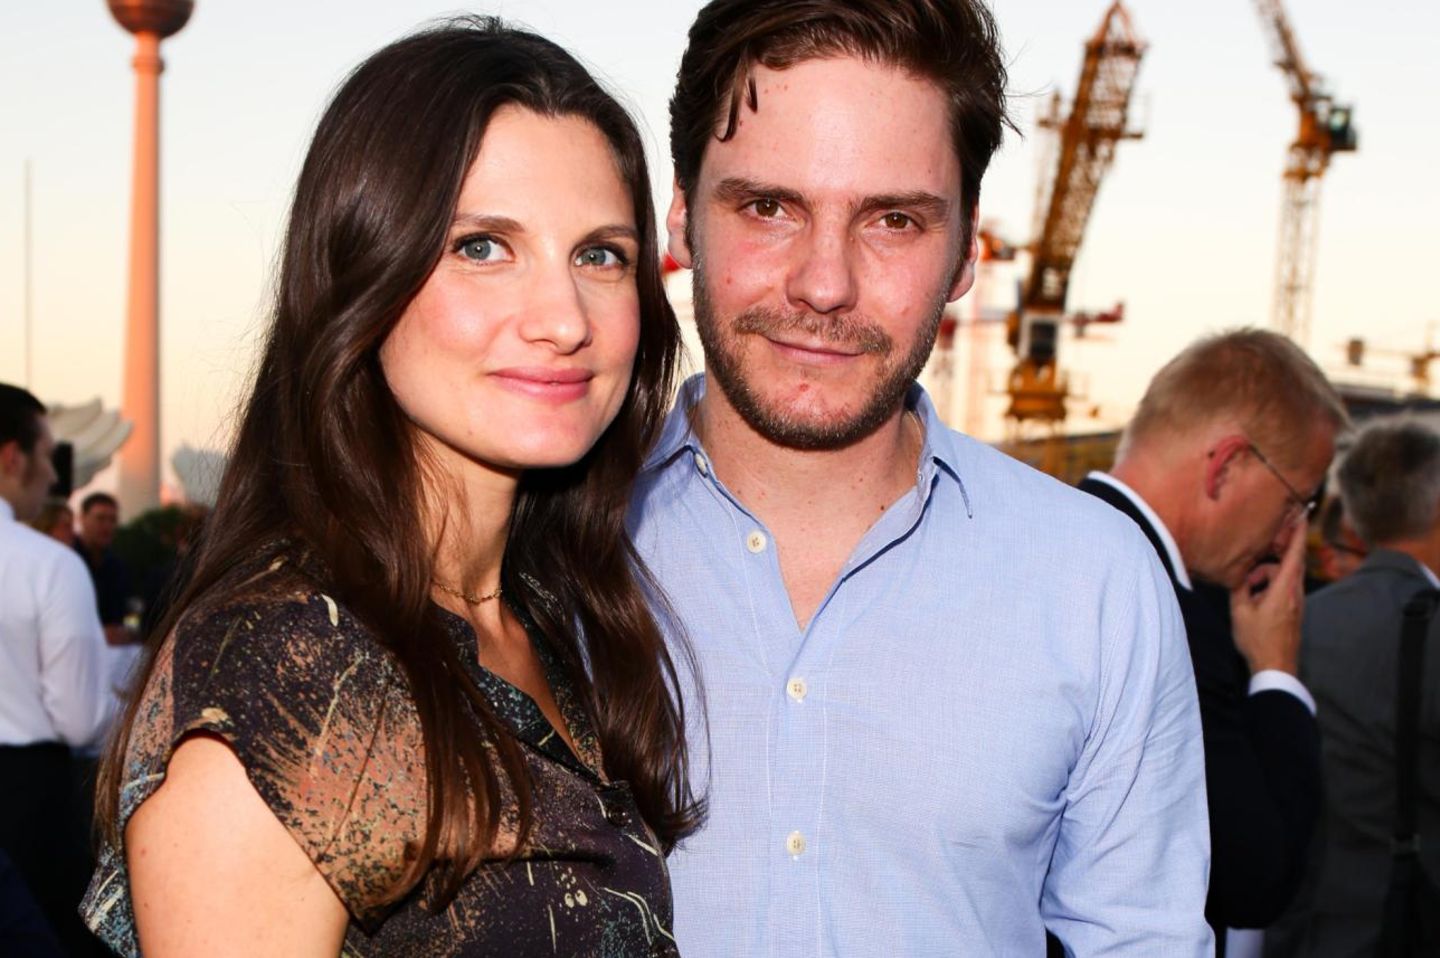 Who Is Daniel Bruhl's Current Partner? Details About Felicitas Rombold And Their Age Gap